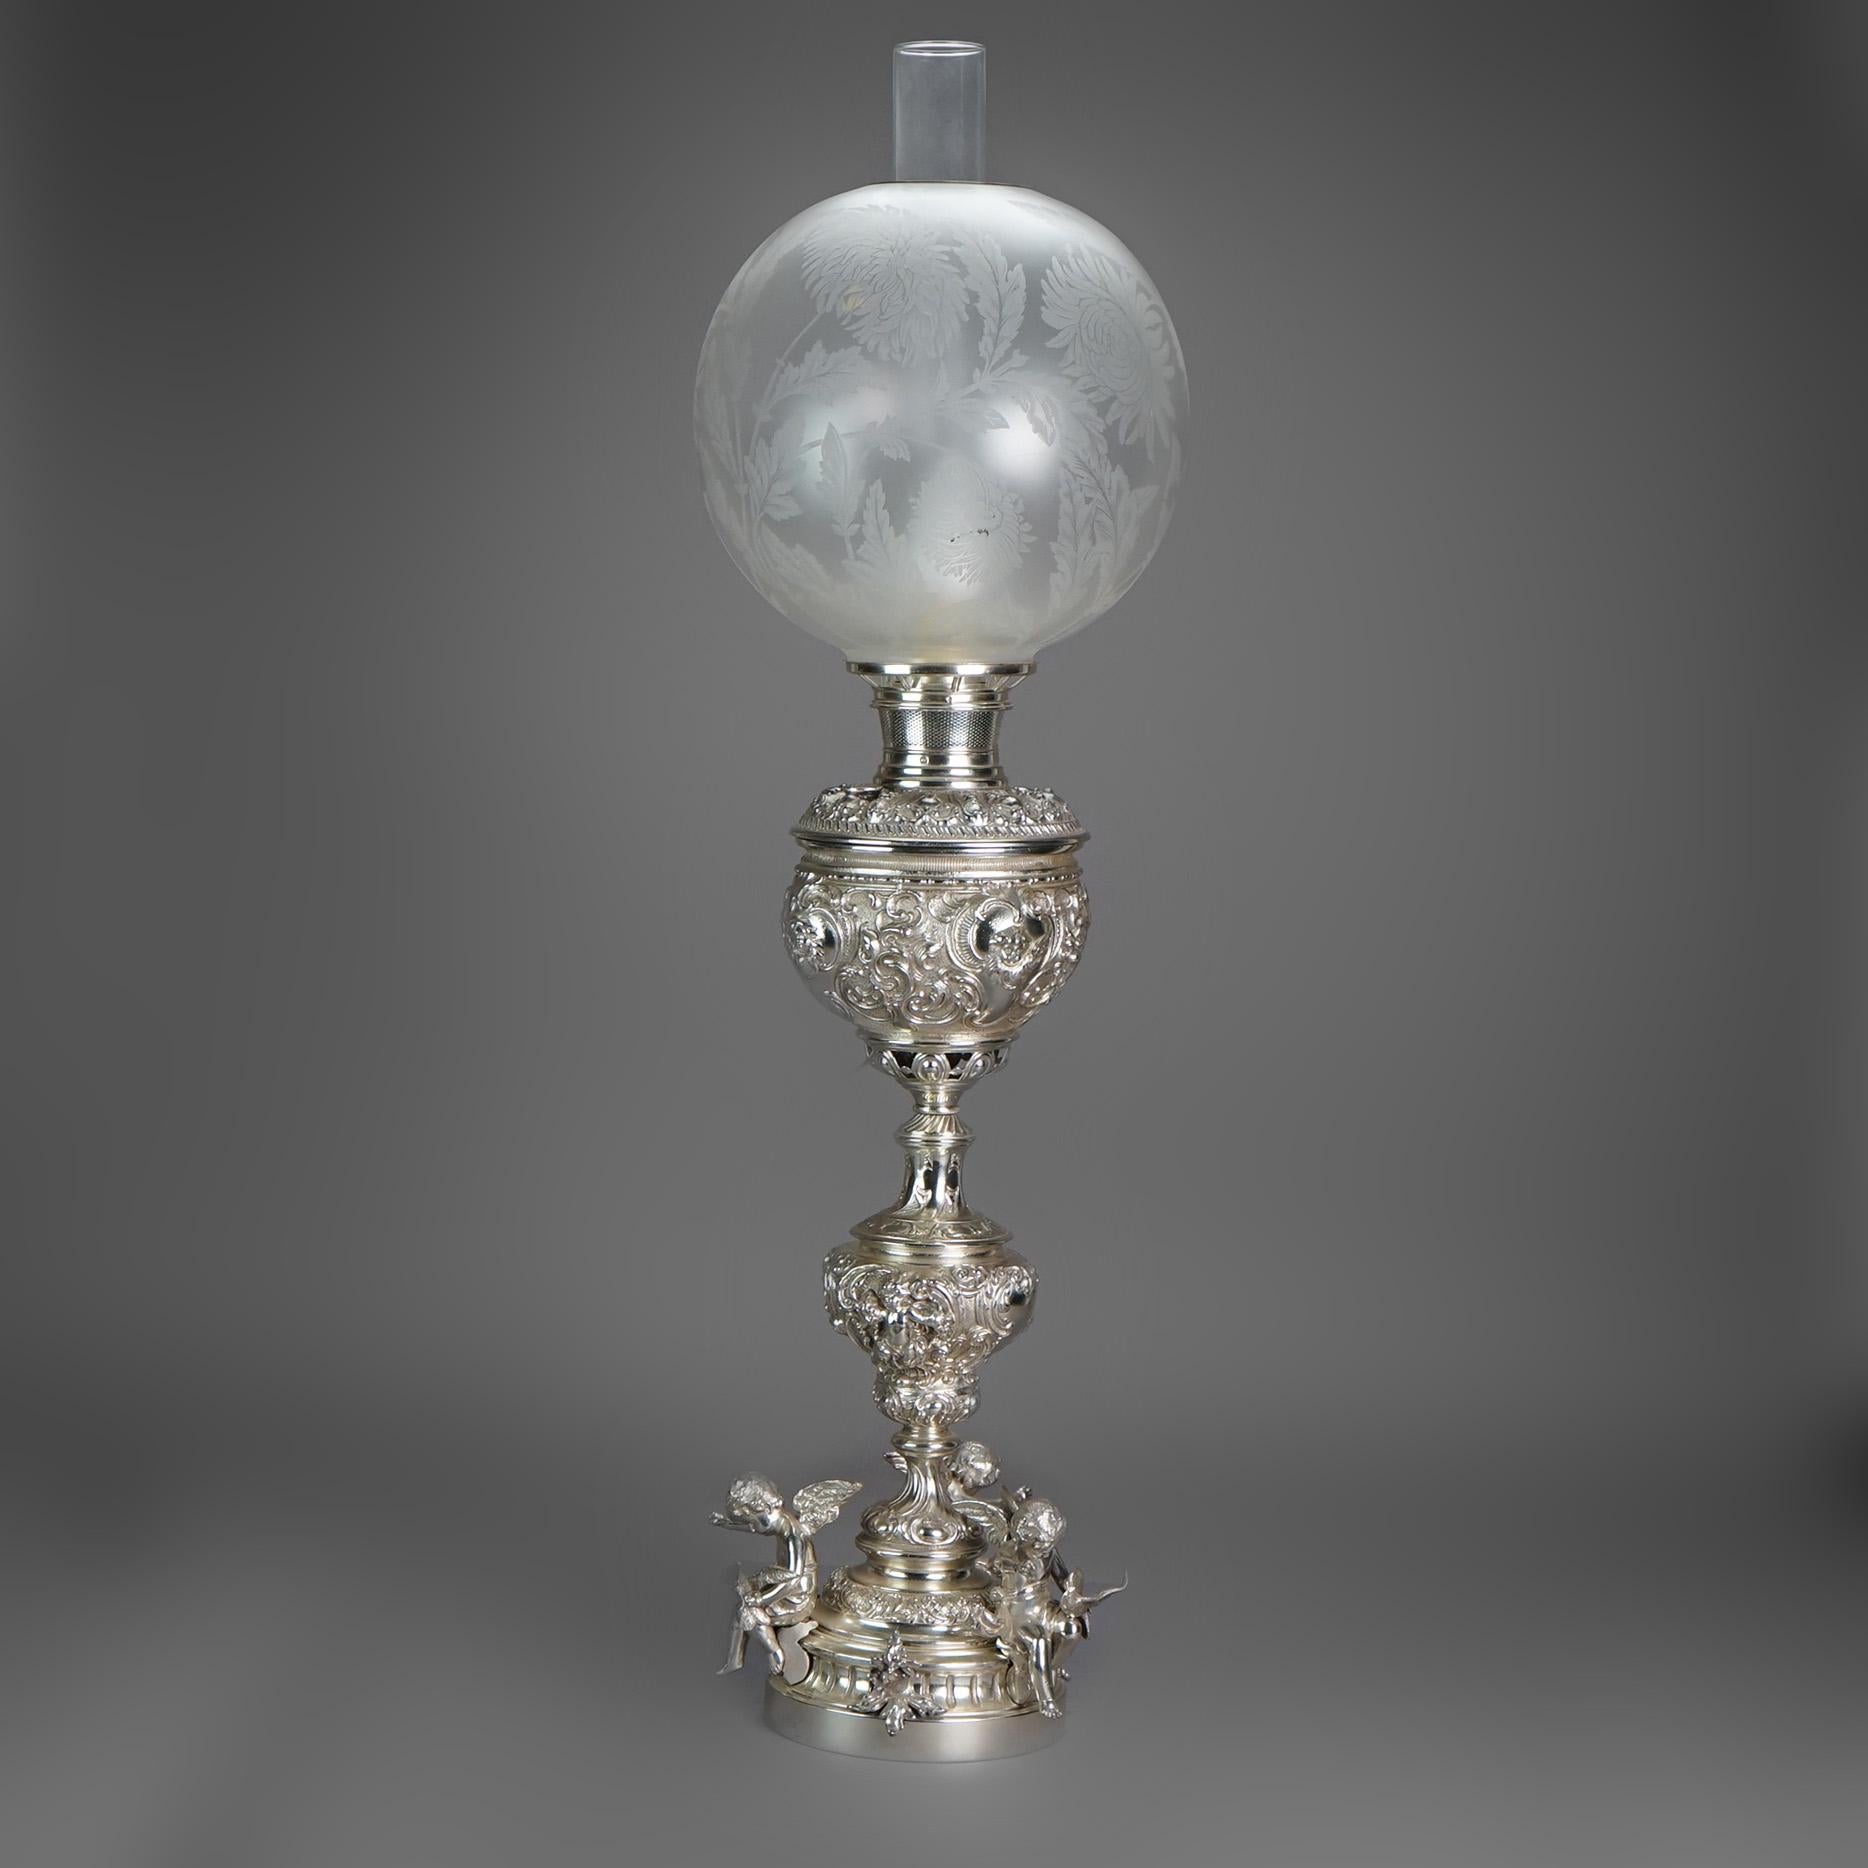 American Antique Rococo Figural Silver Plate Parlor Lamp With Winged Cherubs c1890